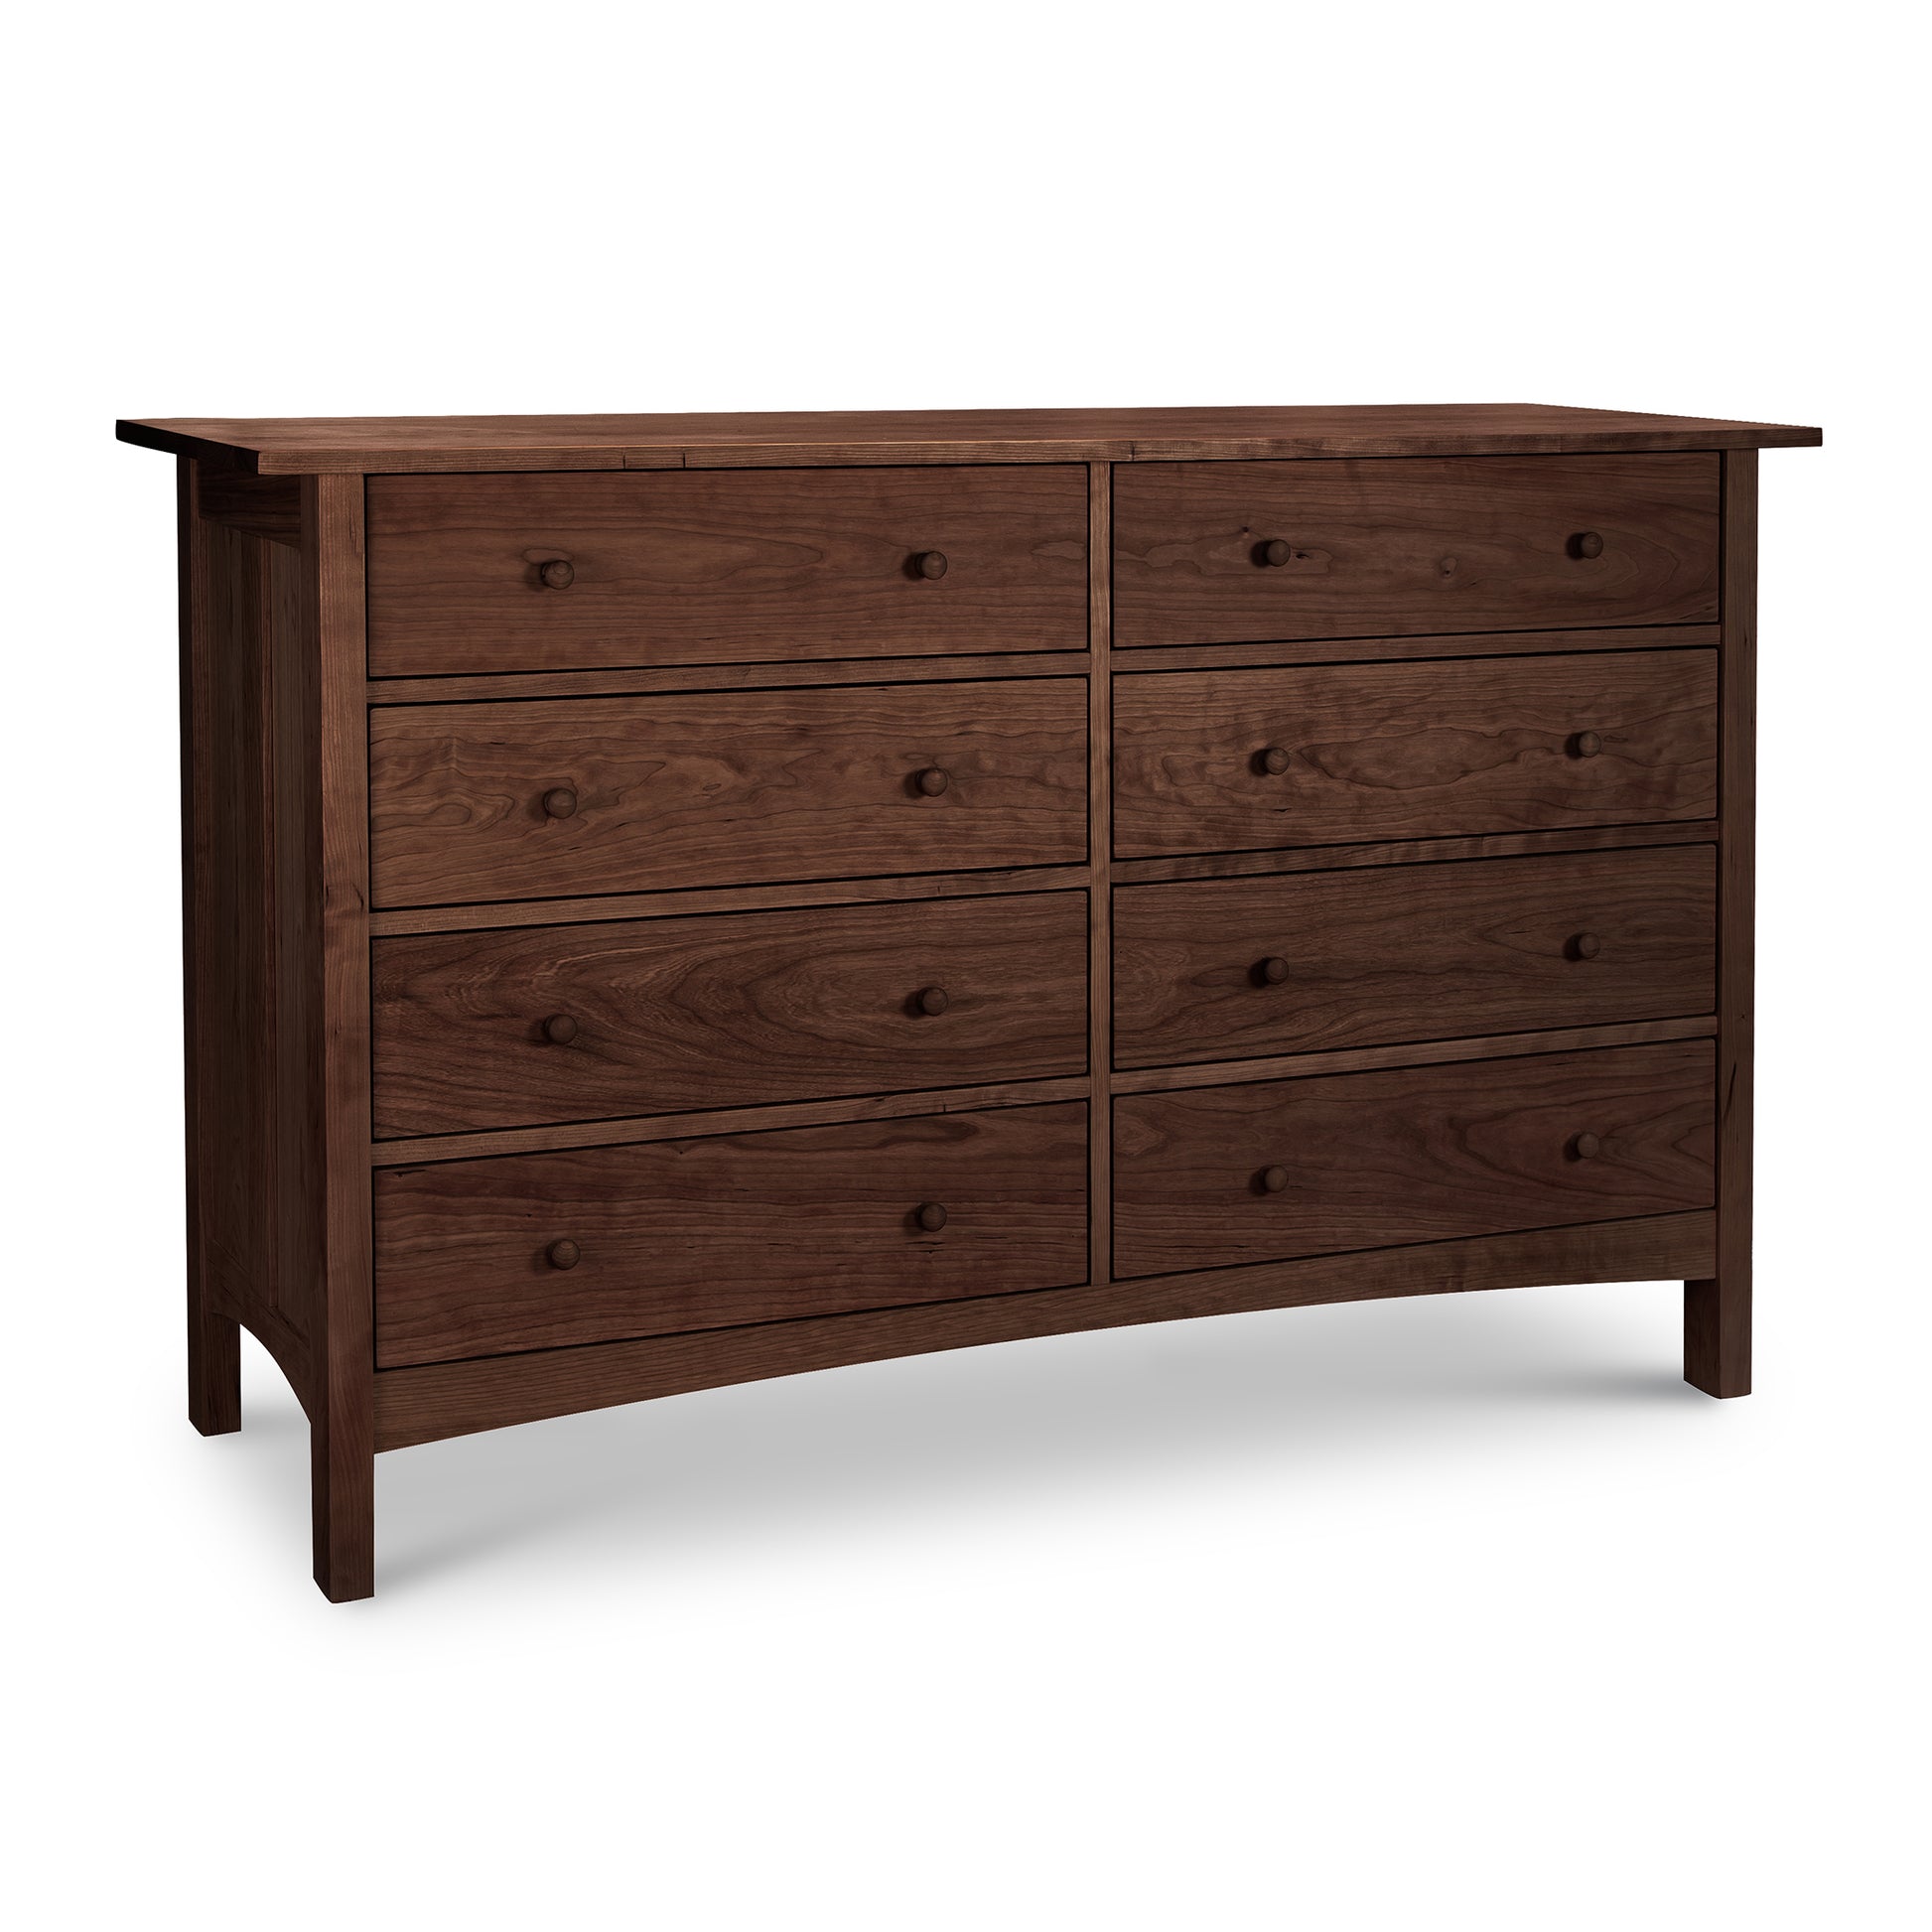 A luxury bedroom furniture piece, the Vermont Furniture Designs Burlington Shaker 8-Drawer Dresser #1, with a smooth finish, isolated on a white background.